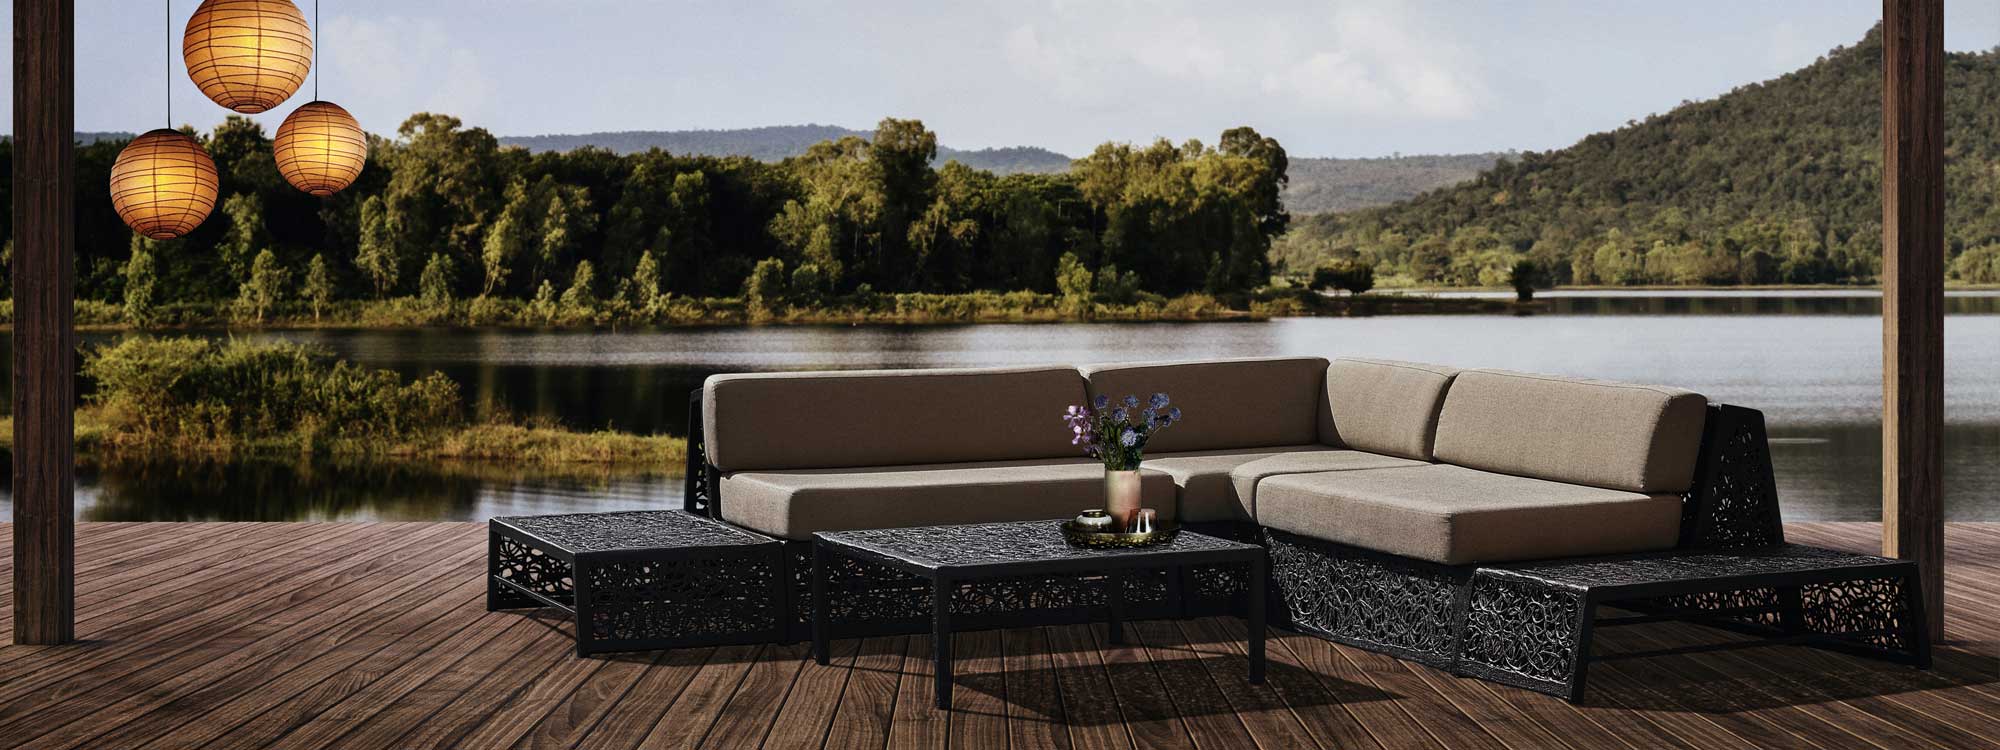 Image of Bios Lounge corner sofa in black basalt fiber by Unknown Furniture, with lake and hills in background